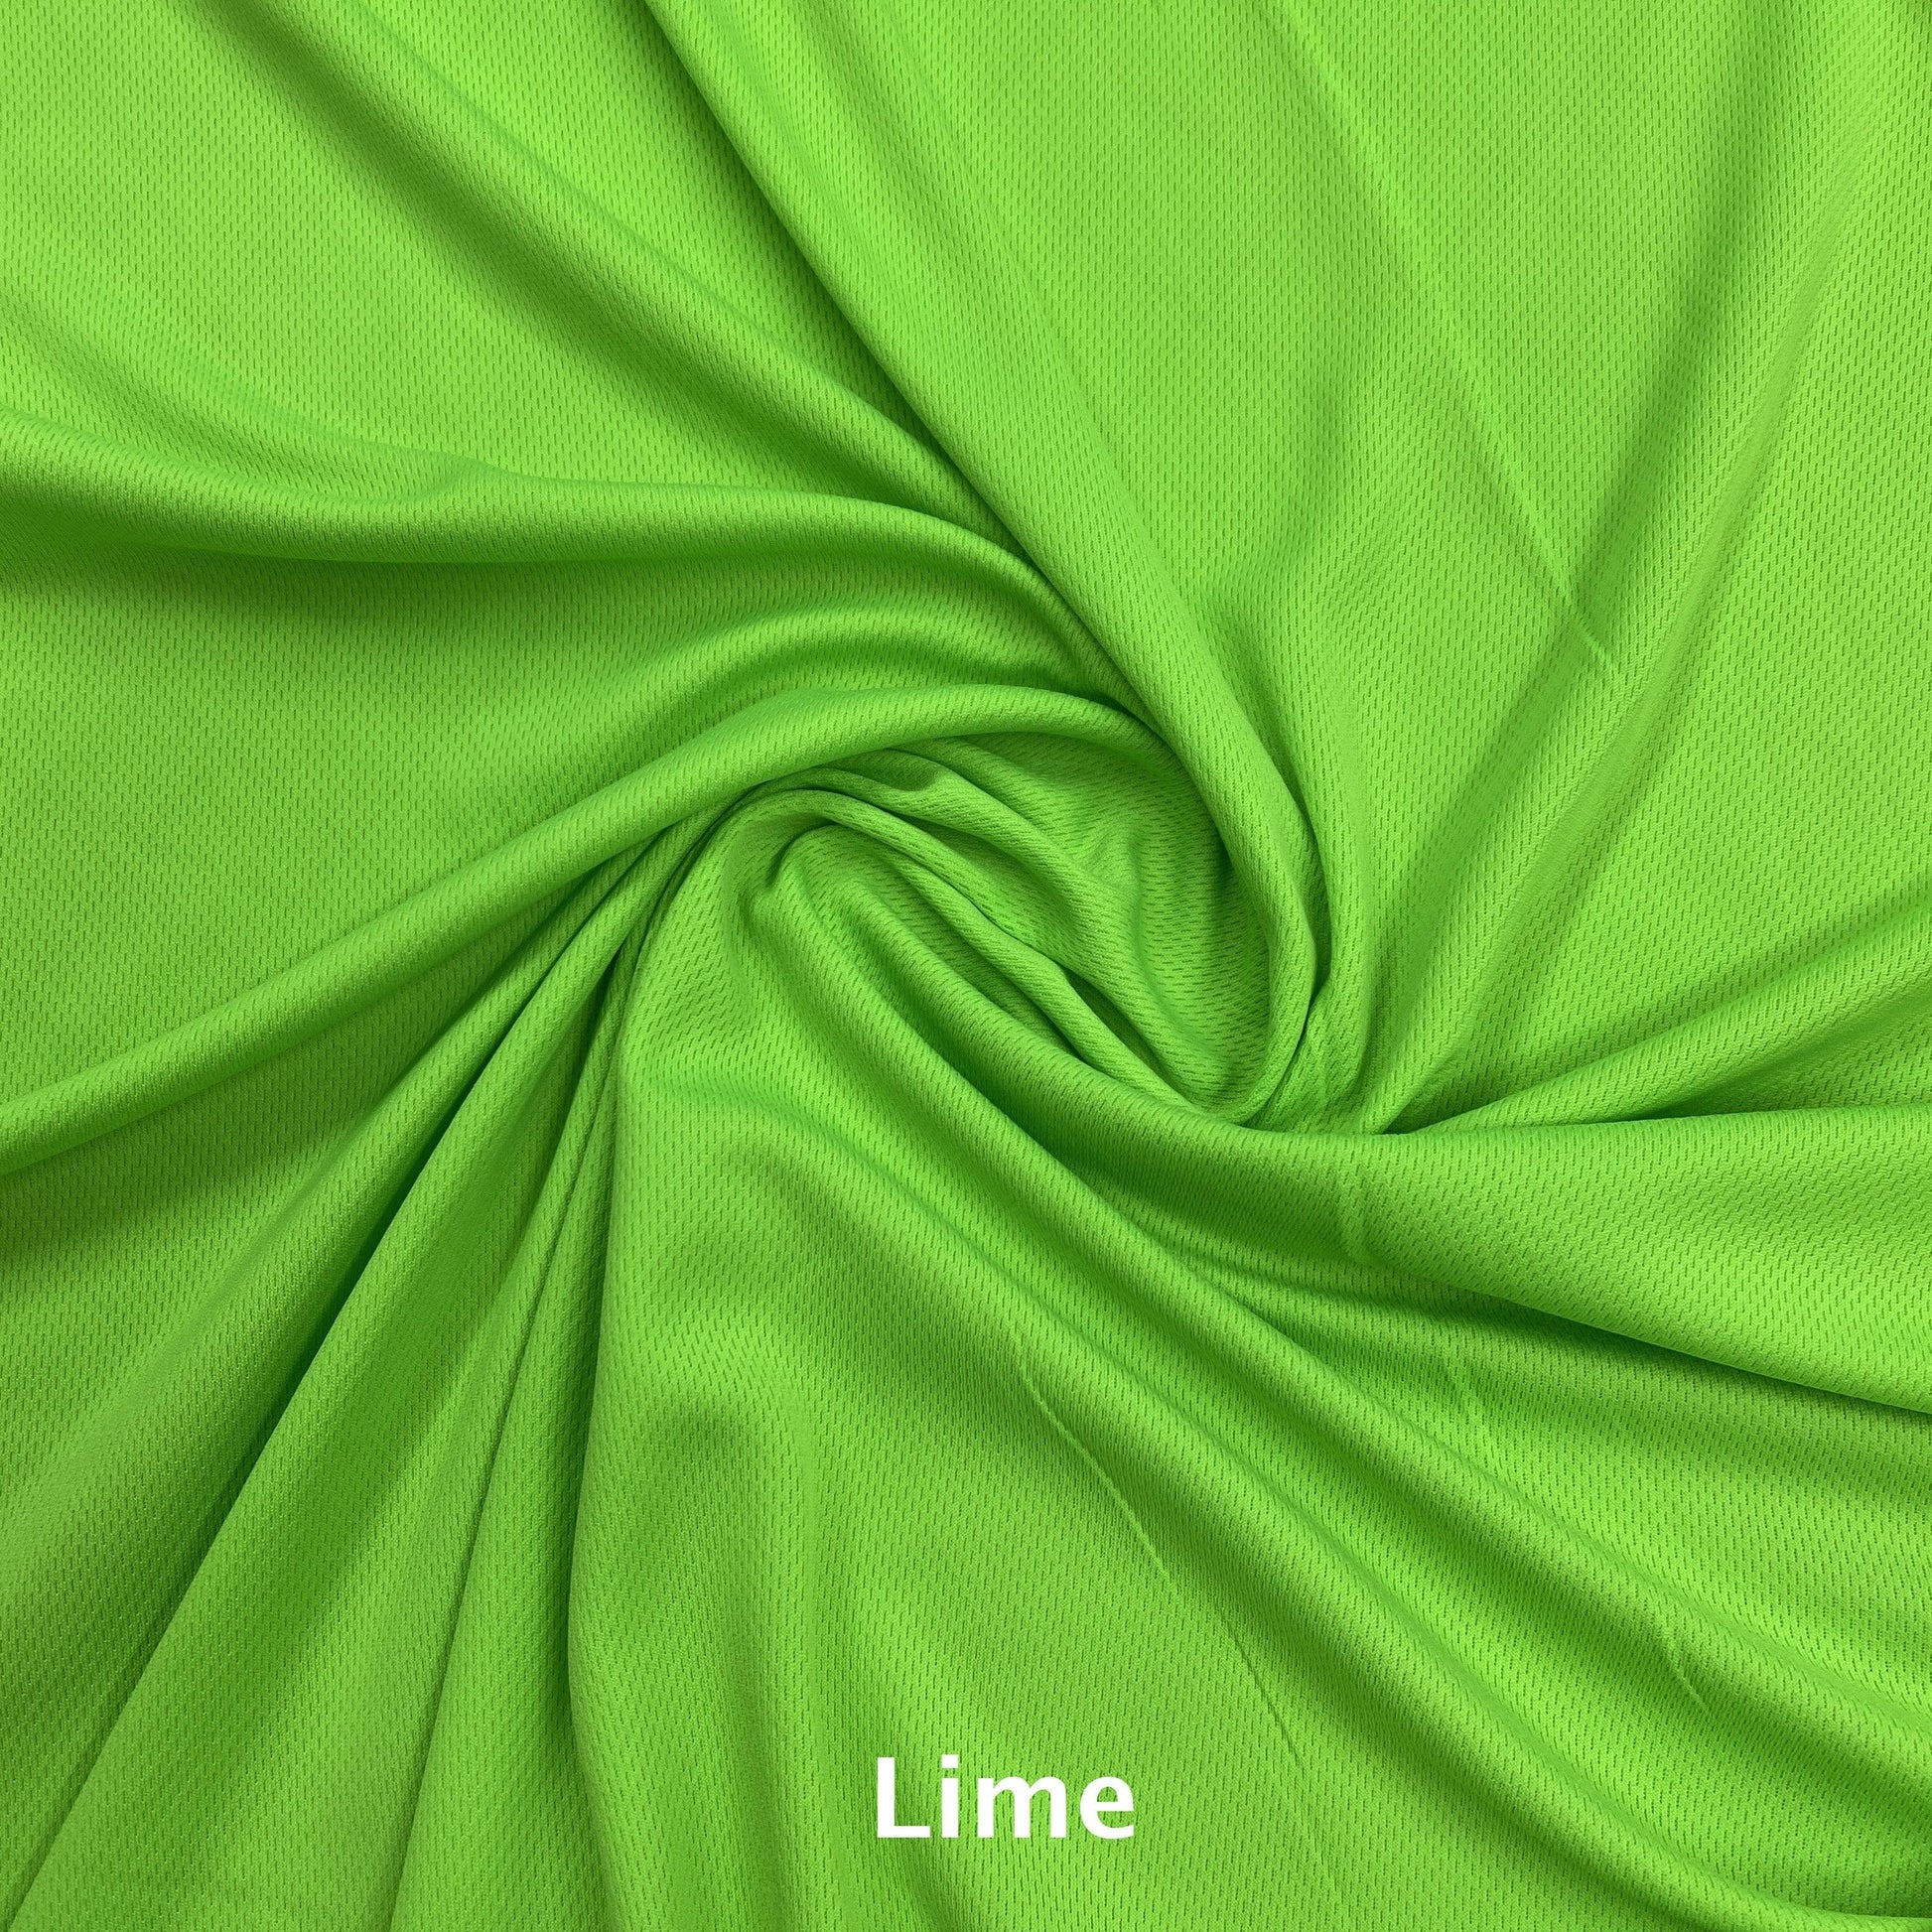 Glow In The Dark Fabric 100%polyester Fabric - China Wholesale